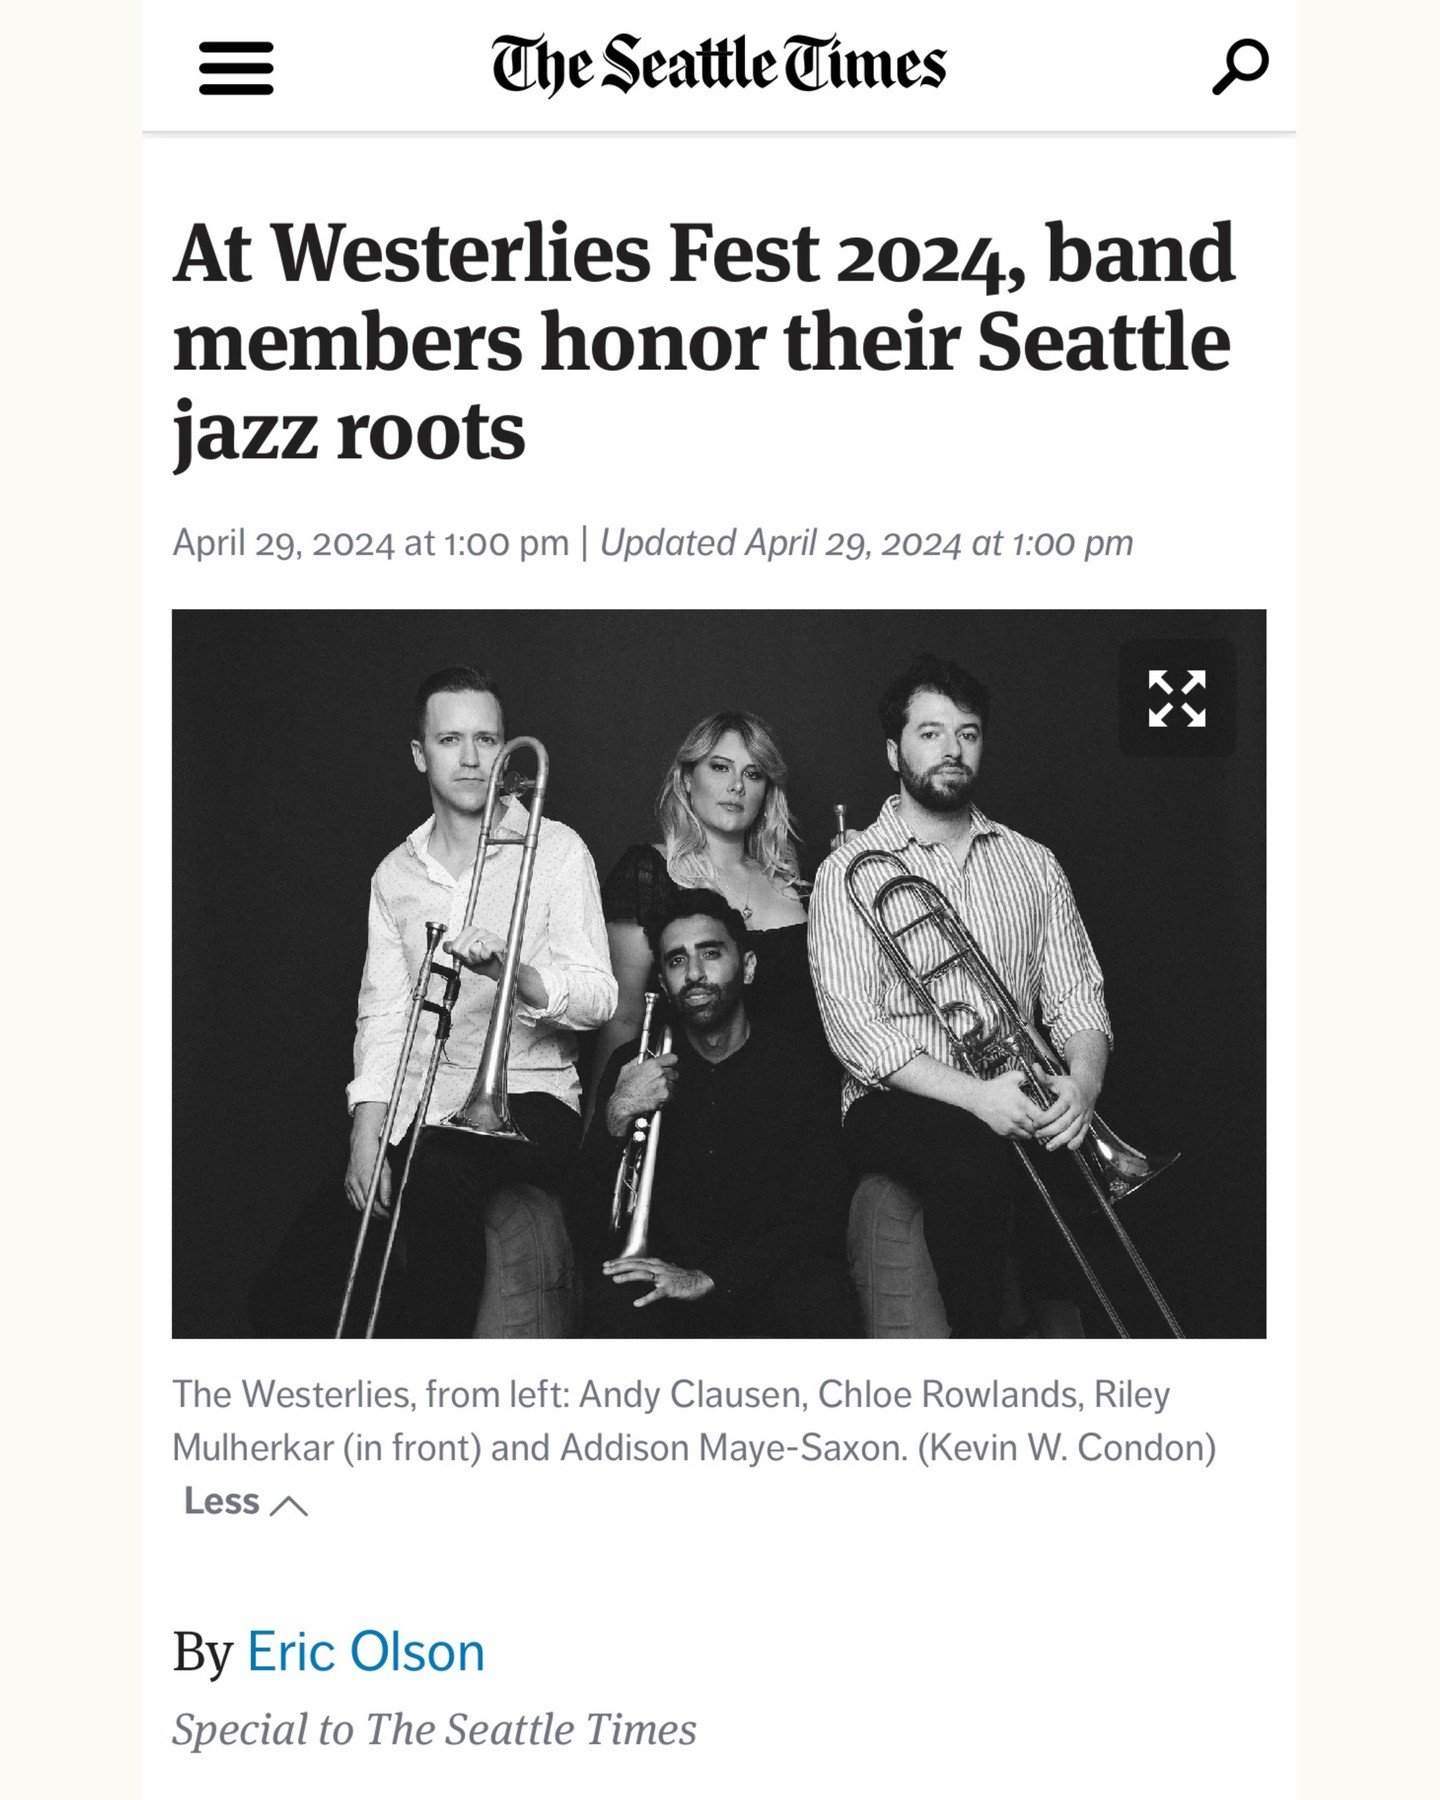 Thank you Eric Olson for telling the story of @westerliesmusic fest so eloquently in @seattletimes! We can't wait to get back home next week to teach at our alma matters and perform alongside friends @samorapinderhughes &amp; @tiltsounds May 9-11th. 